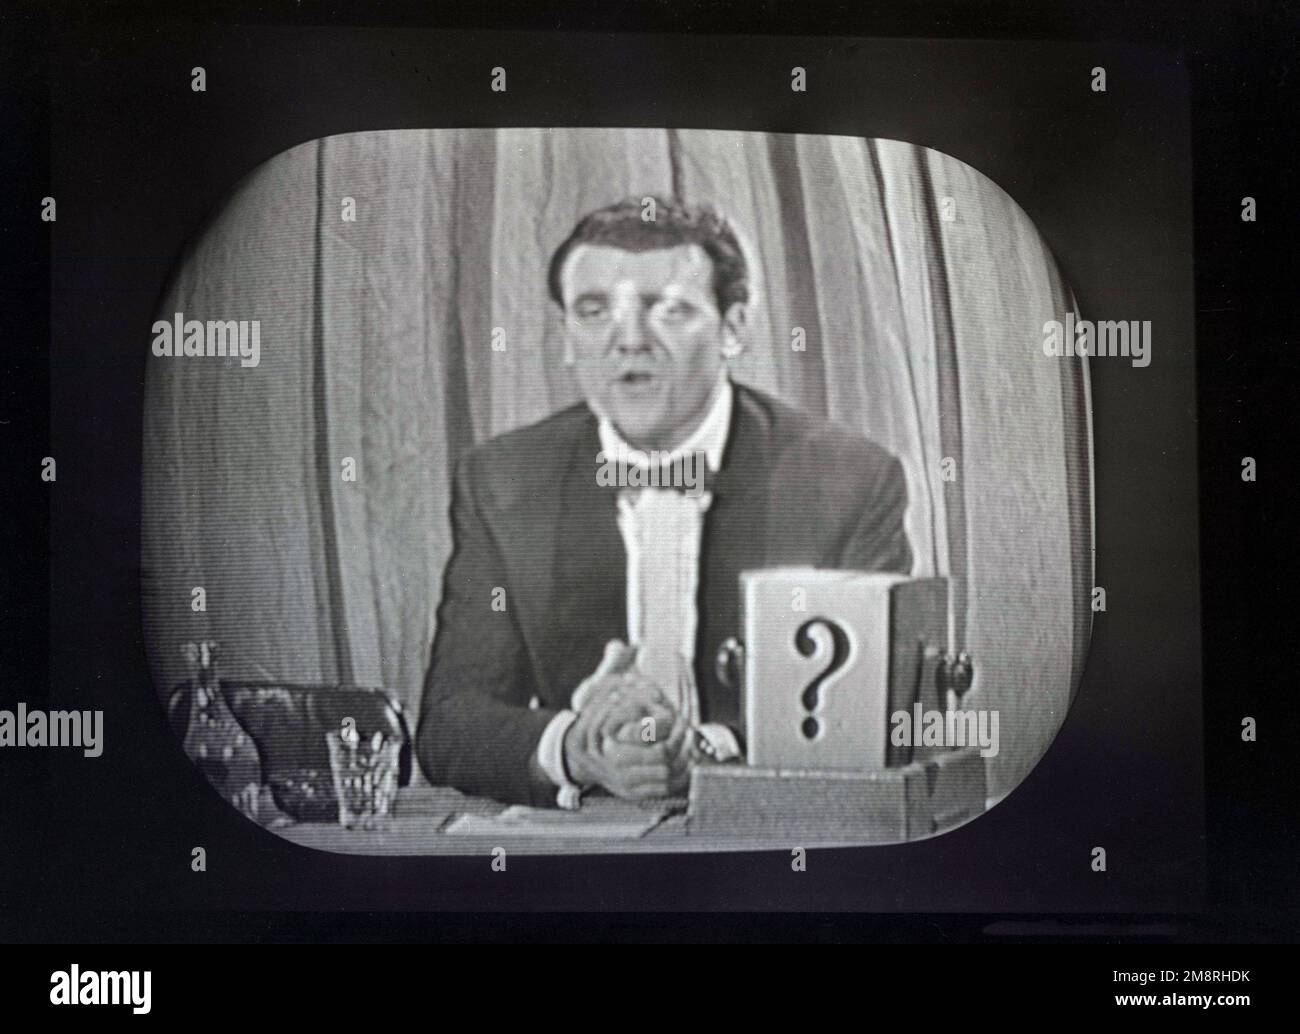 1950s, historical, Eamonn Andrews presenting the British game show, What's My Line?. Broadcast on BBC television from 1951 to 1963, the panel game show was based on the US version of the same name, and was one of most popular television programmes of the era. The show's panelists had to question contestants to try and guess their occupation, i.e their 'line of work'. Stock Photo